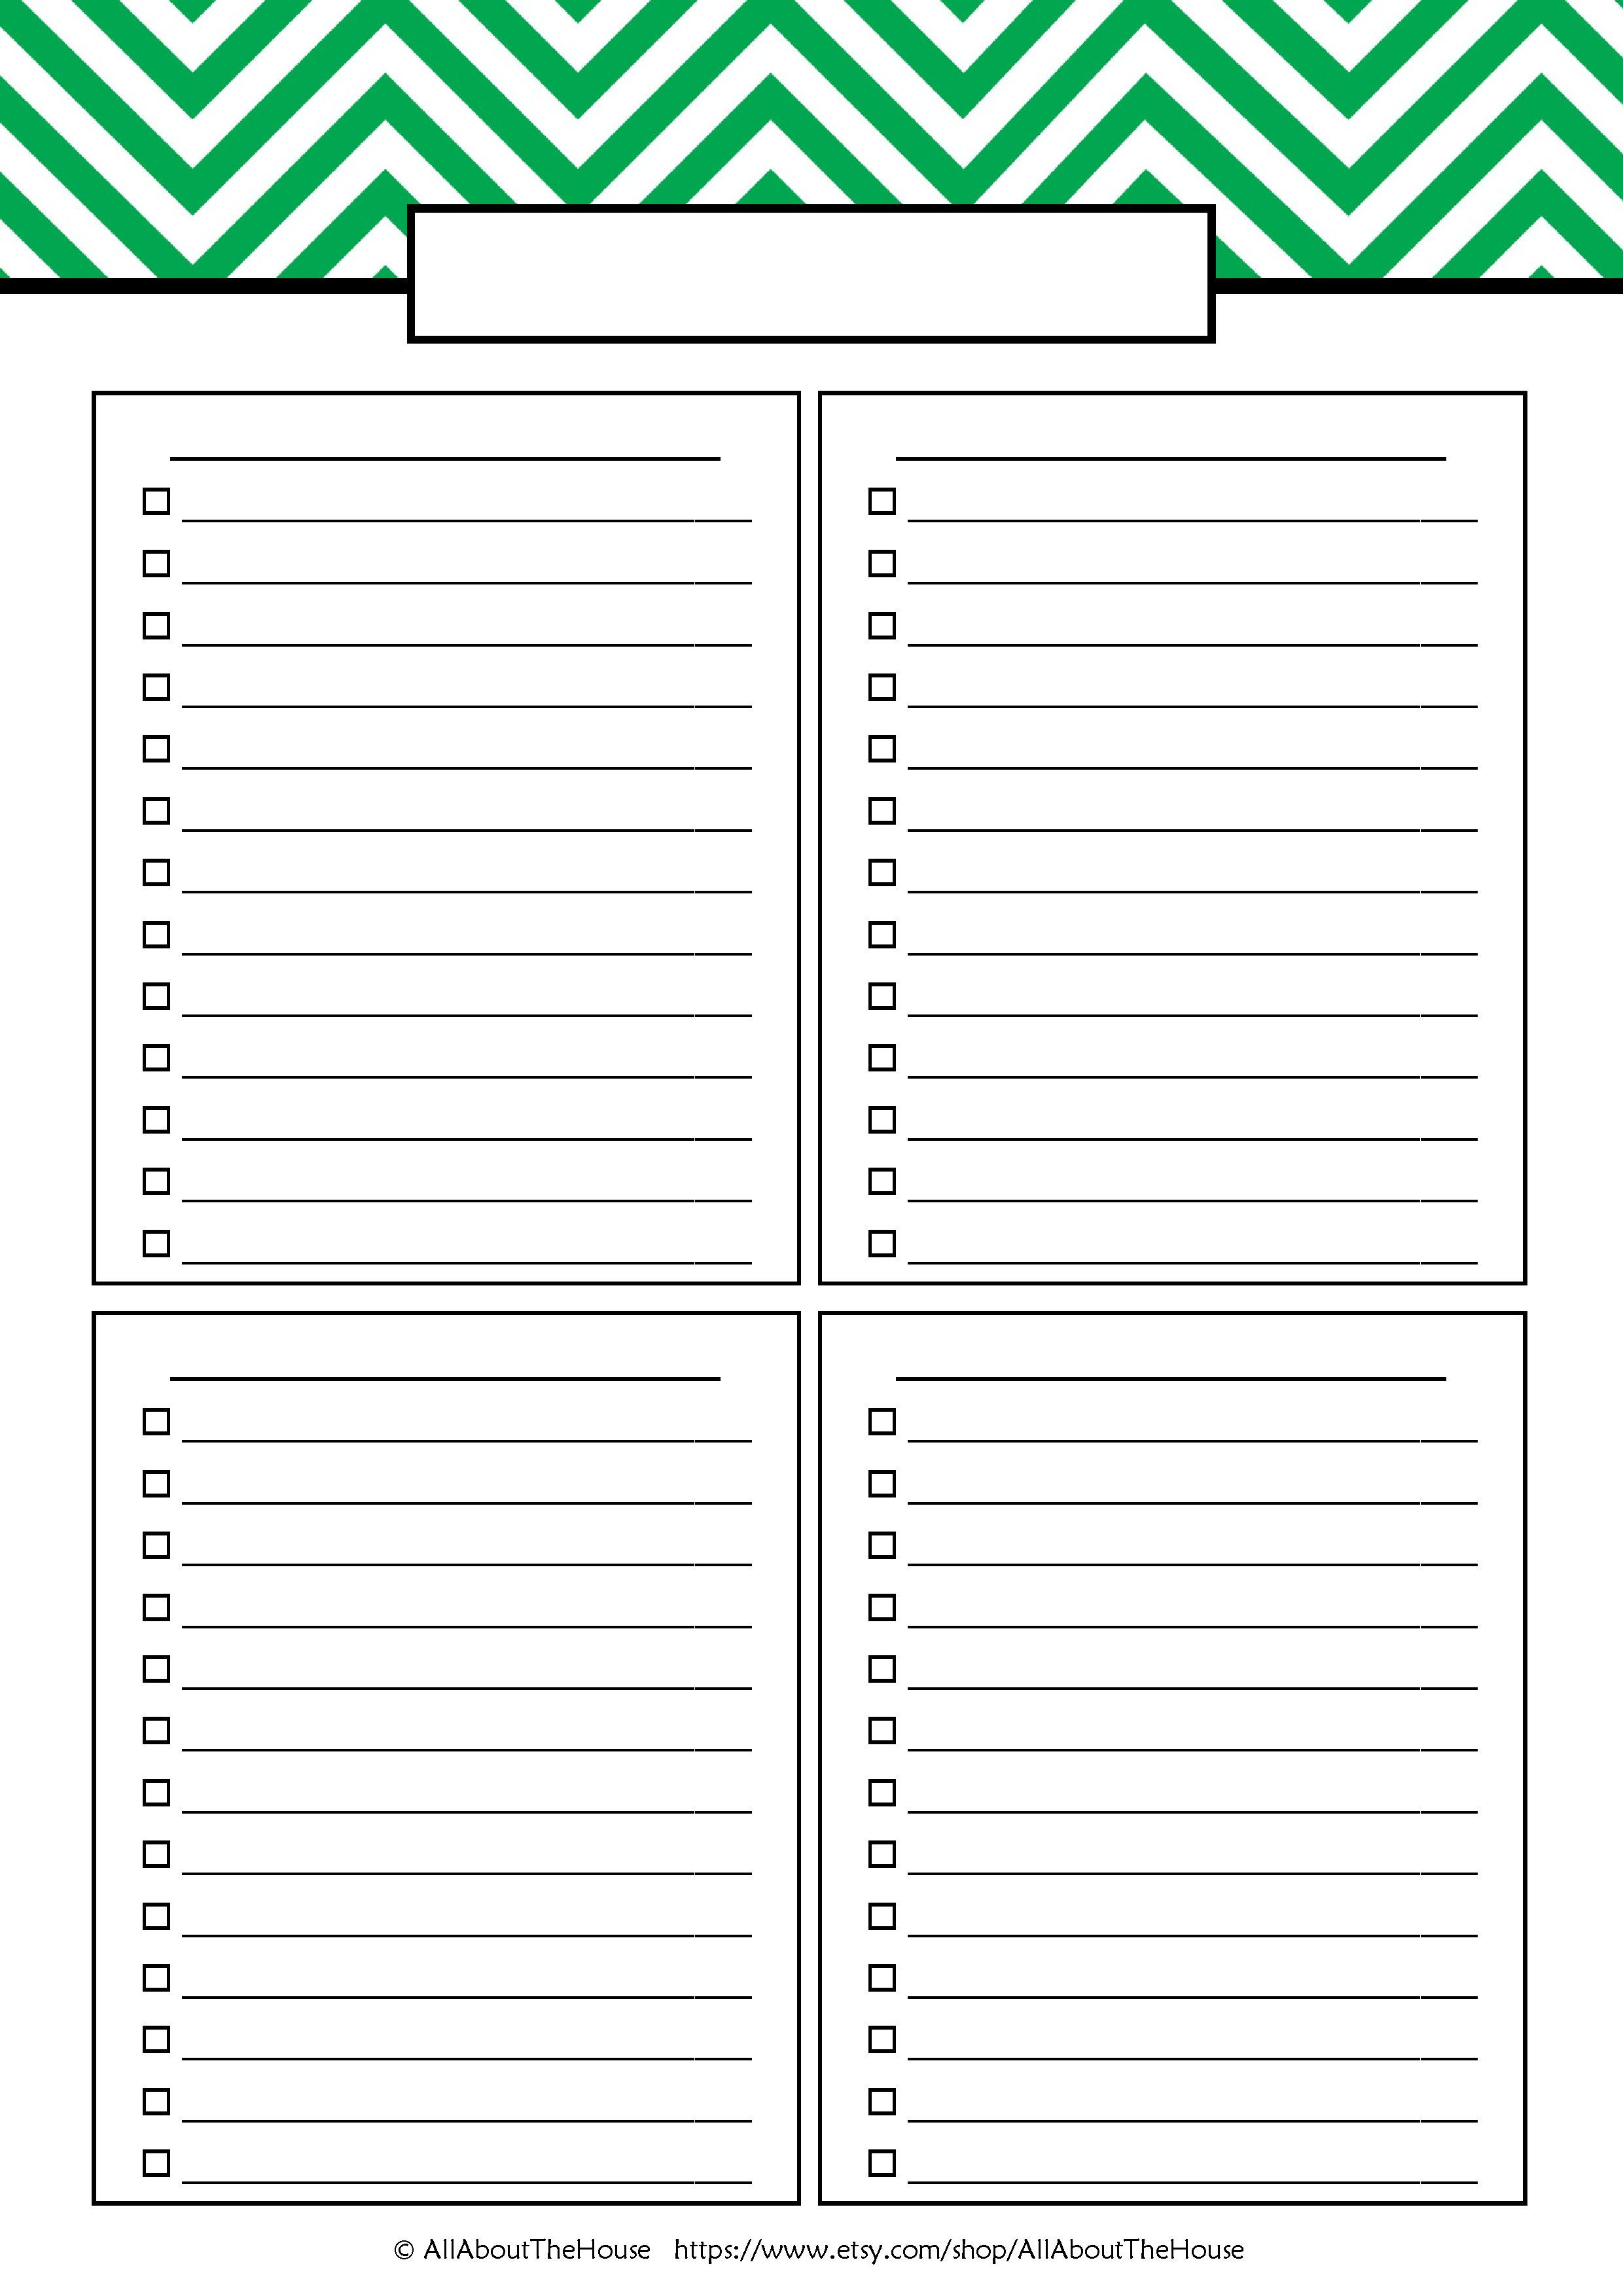 Pin By Mandy Deal On Calendar, Planner &amp; Journals | Grocery inside Printable Blank Checklist